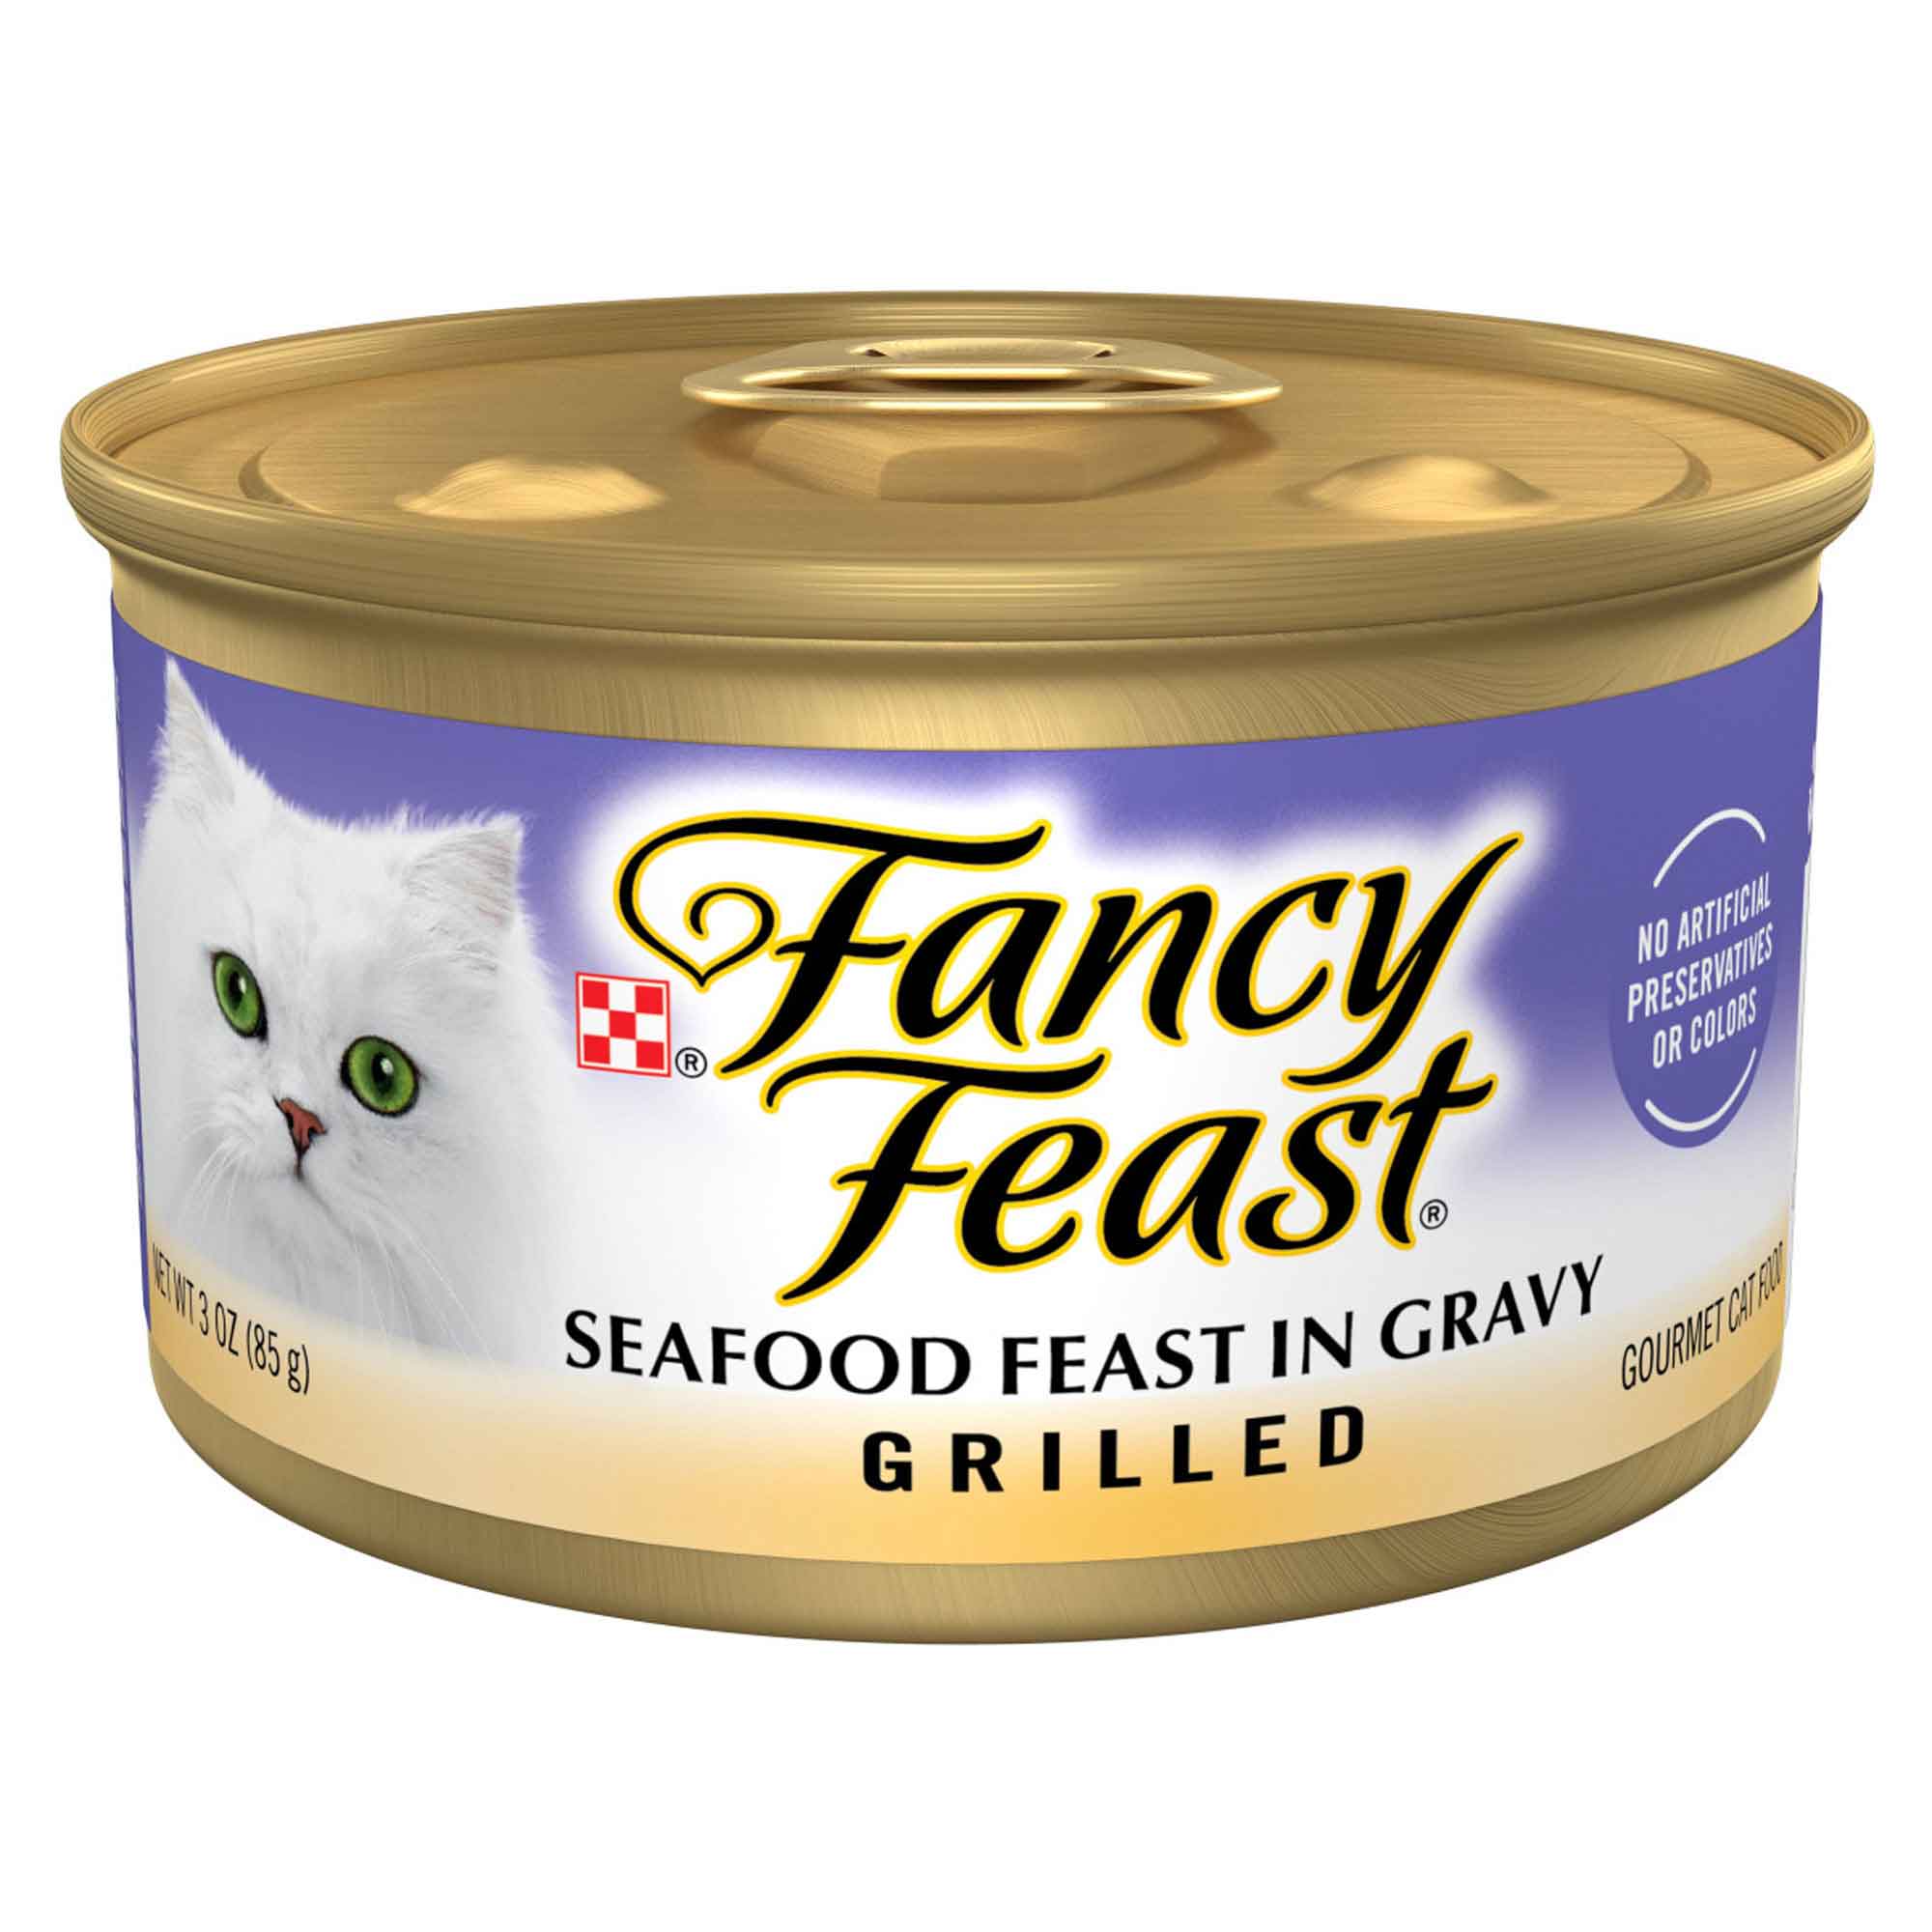 Purina Fancy Feast Gravy Wet Cat Food, Grilled Seafood Feast in Gravy - 3 Ounce Can